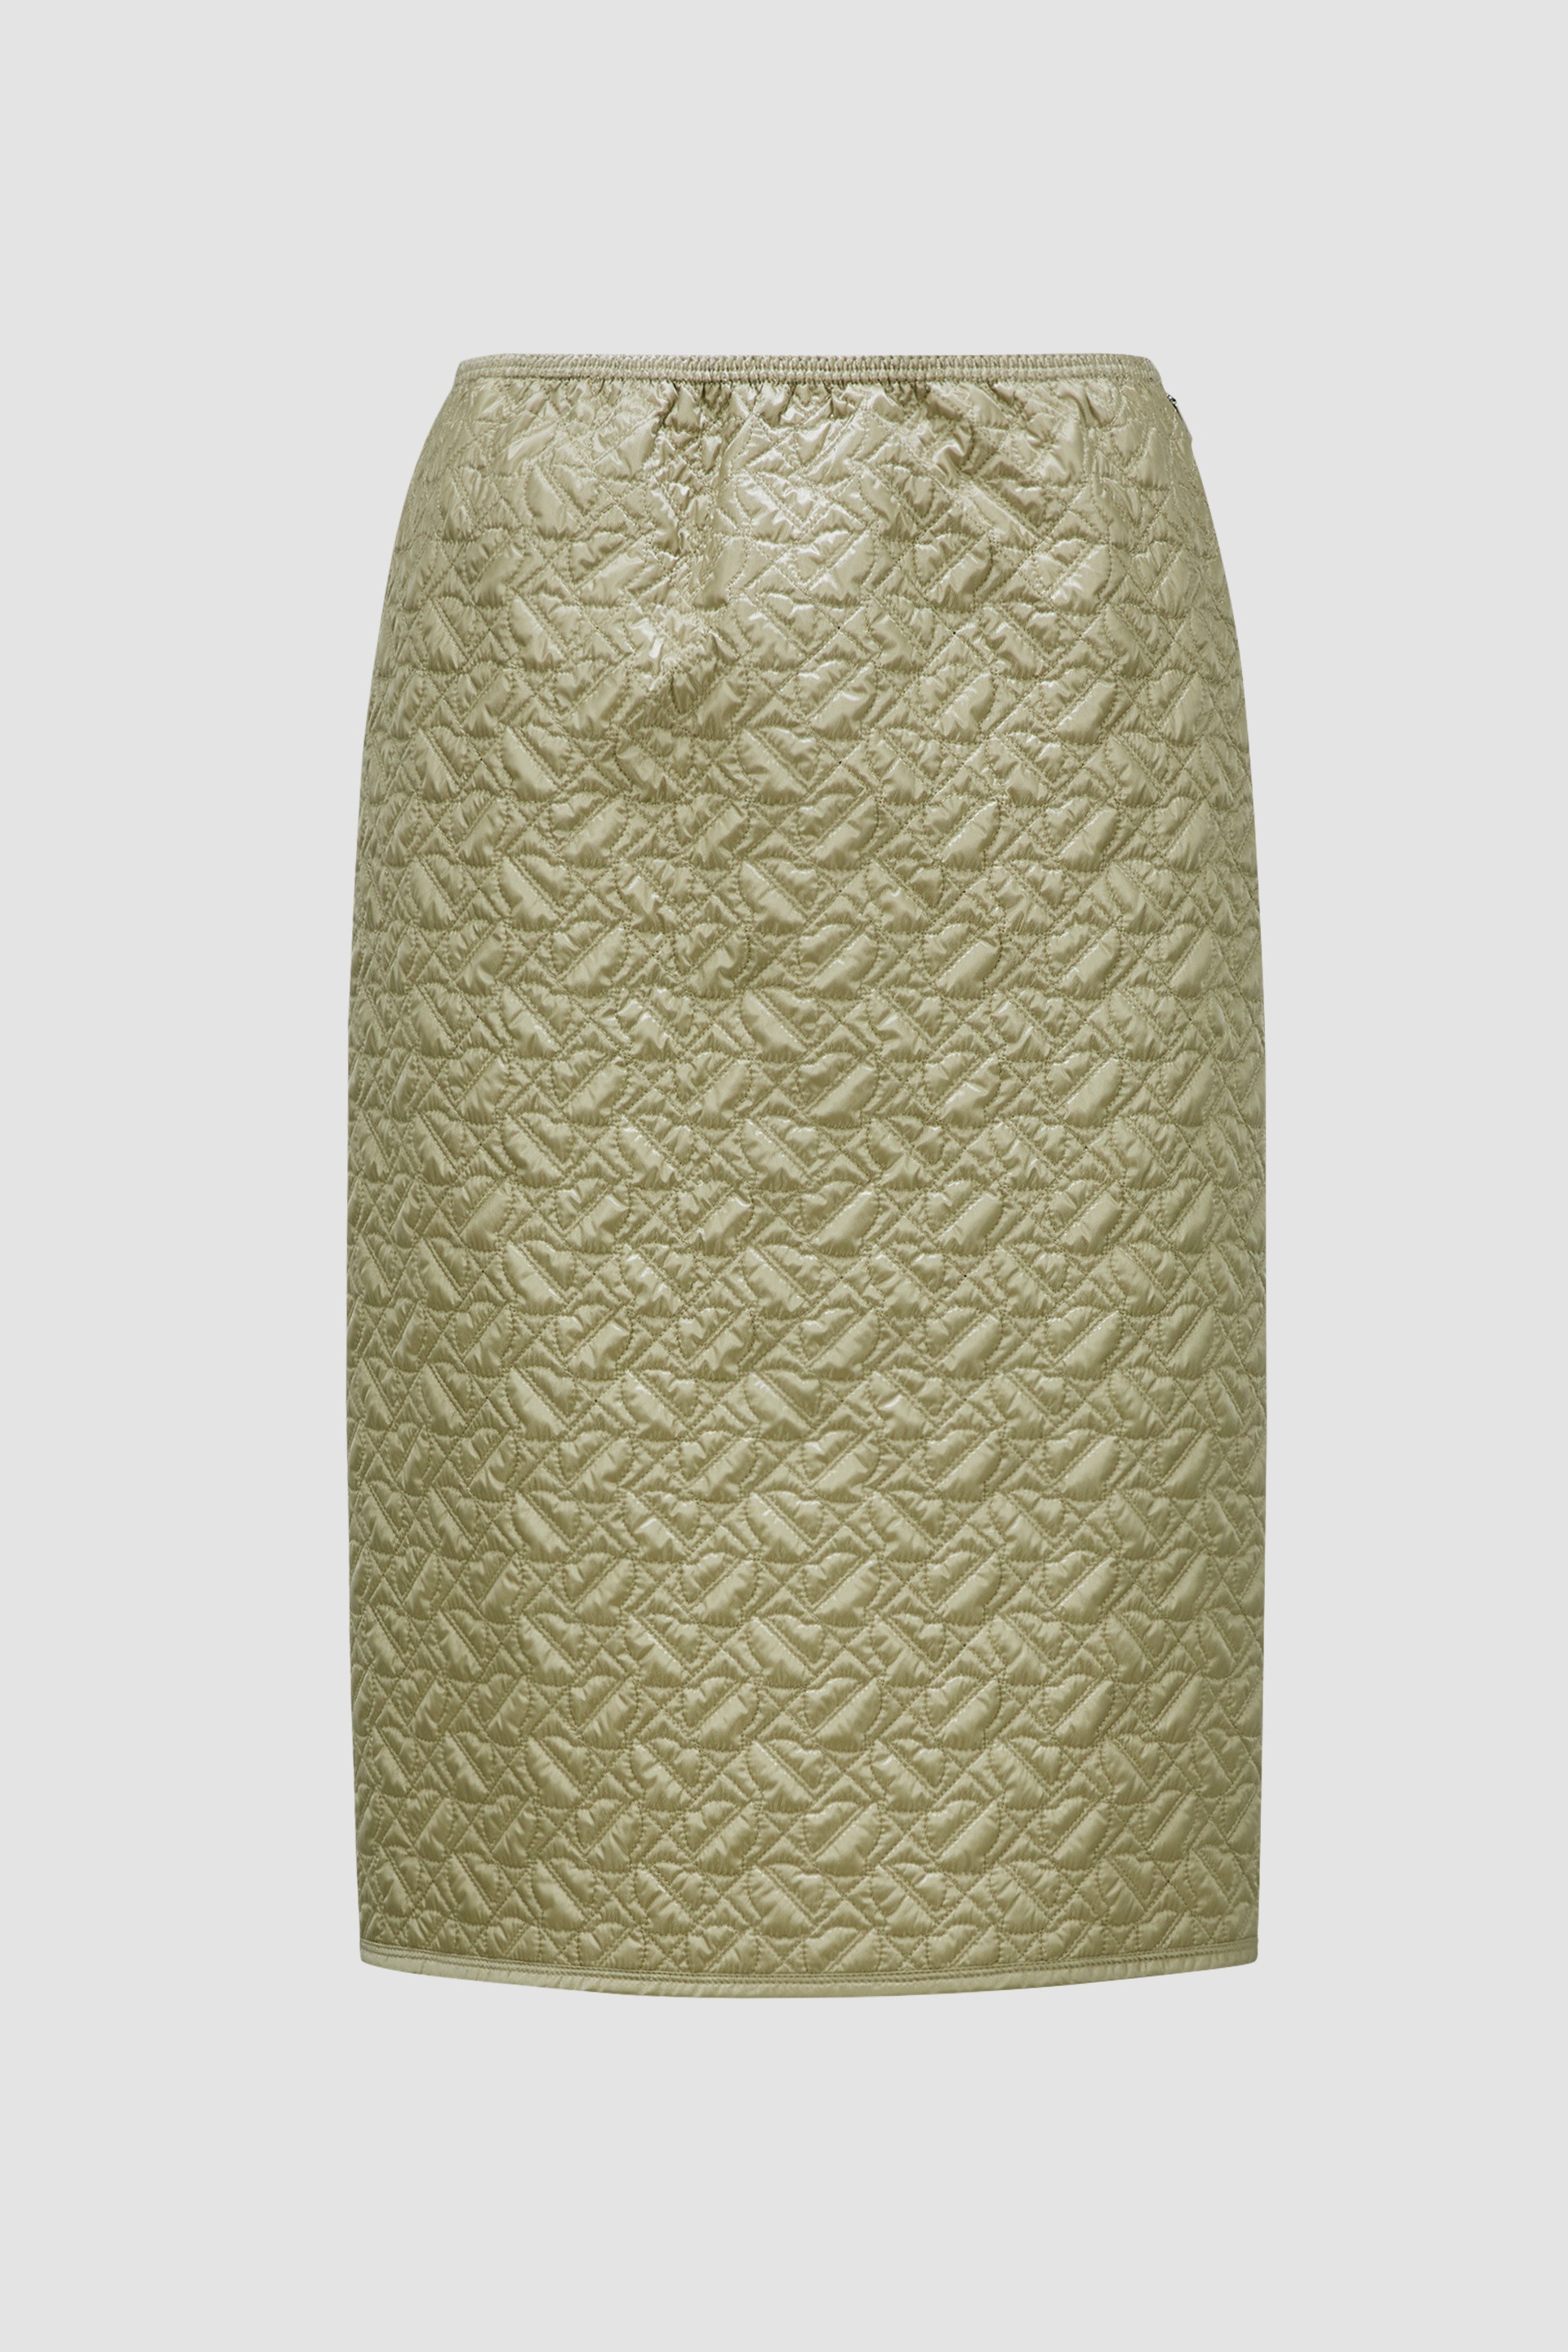 Quilted Pencil Skirt - 1